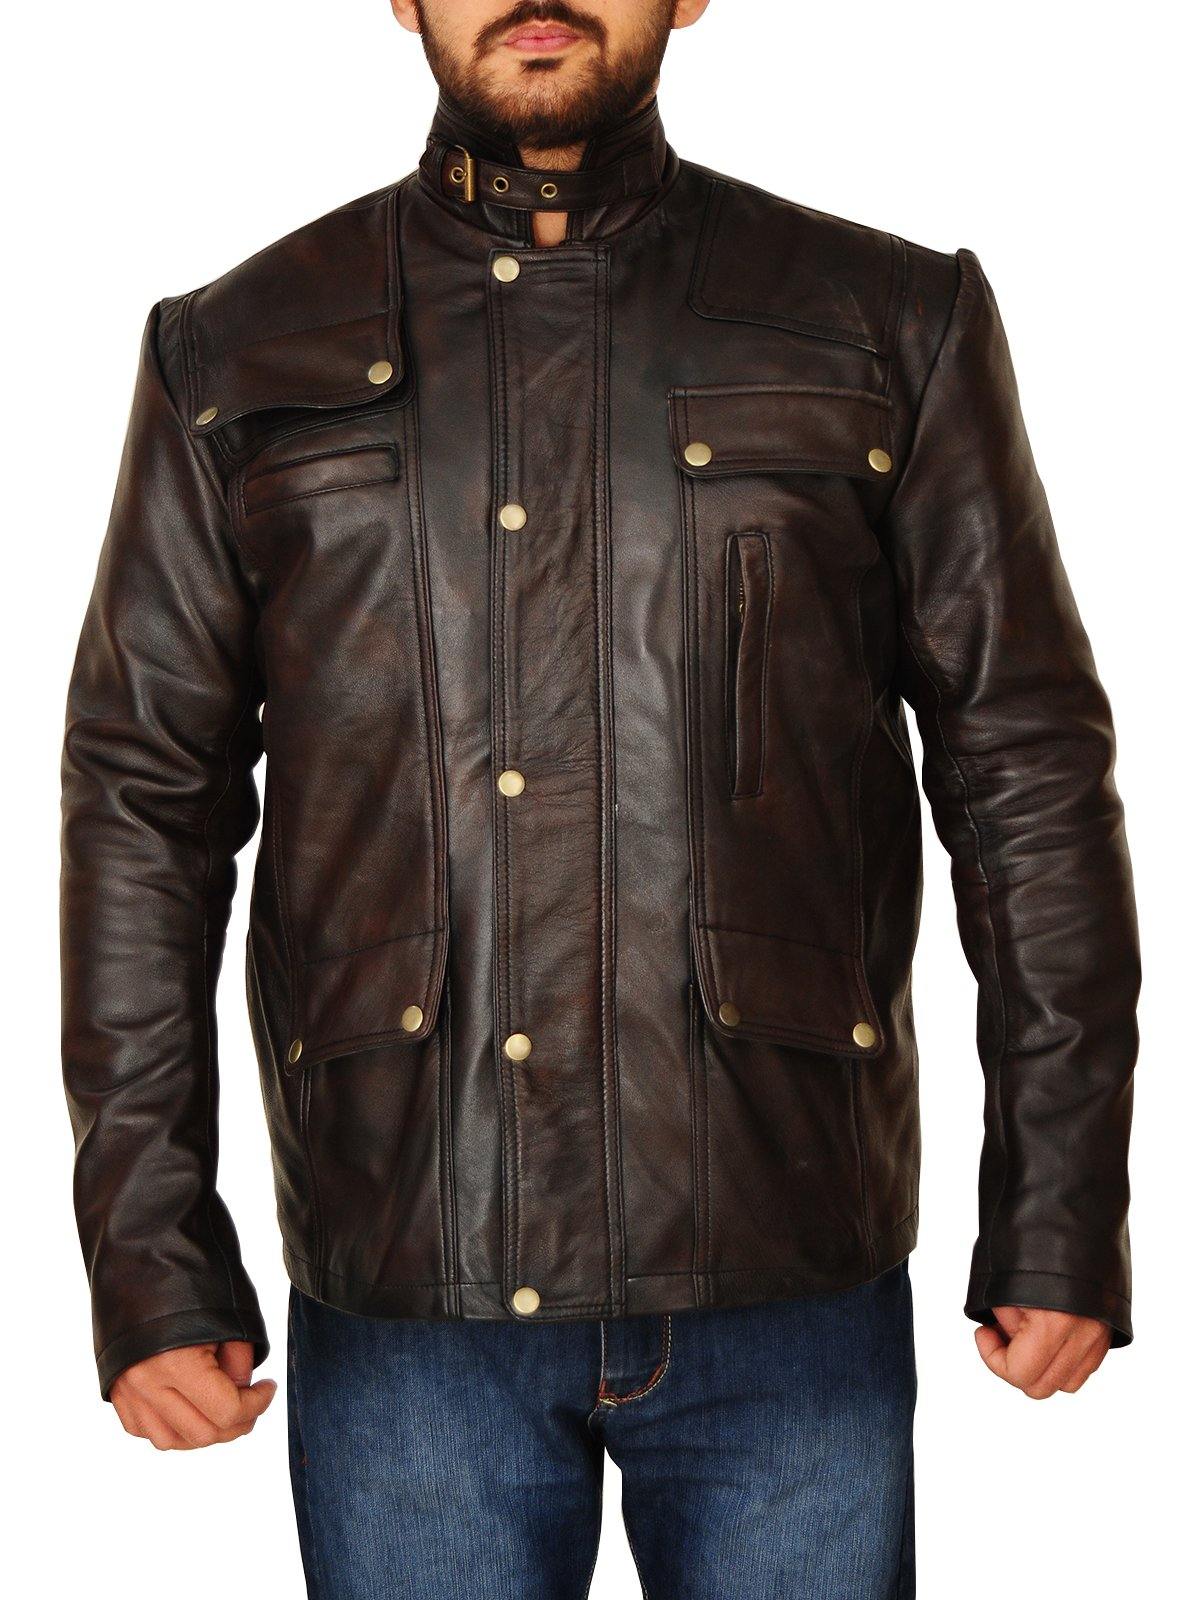 Mens Classic Dark Brown Leather Jacket - Wiseleather